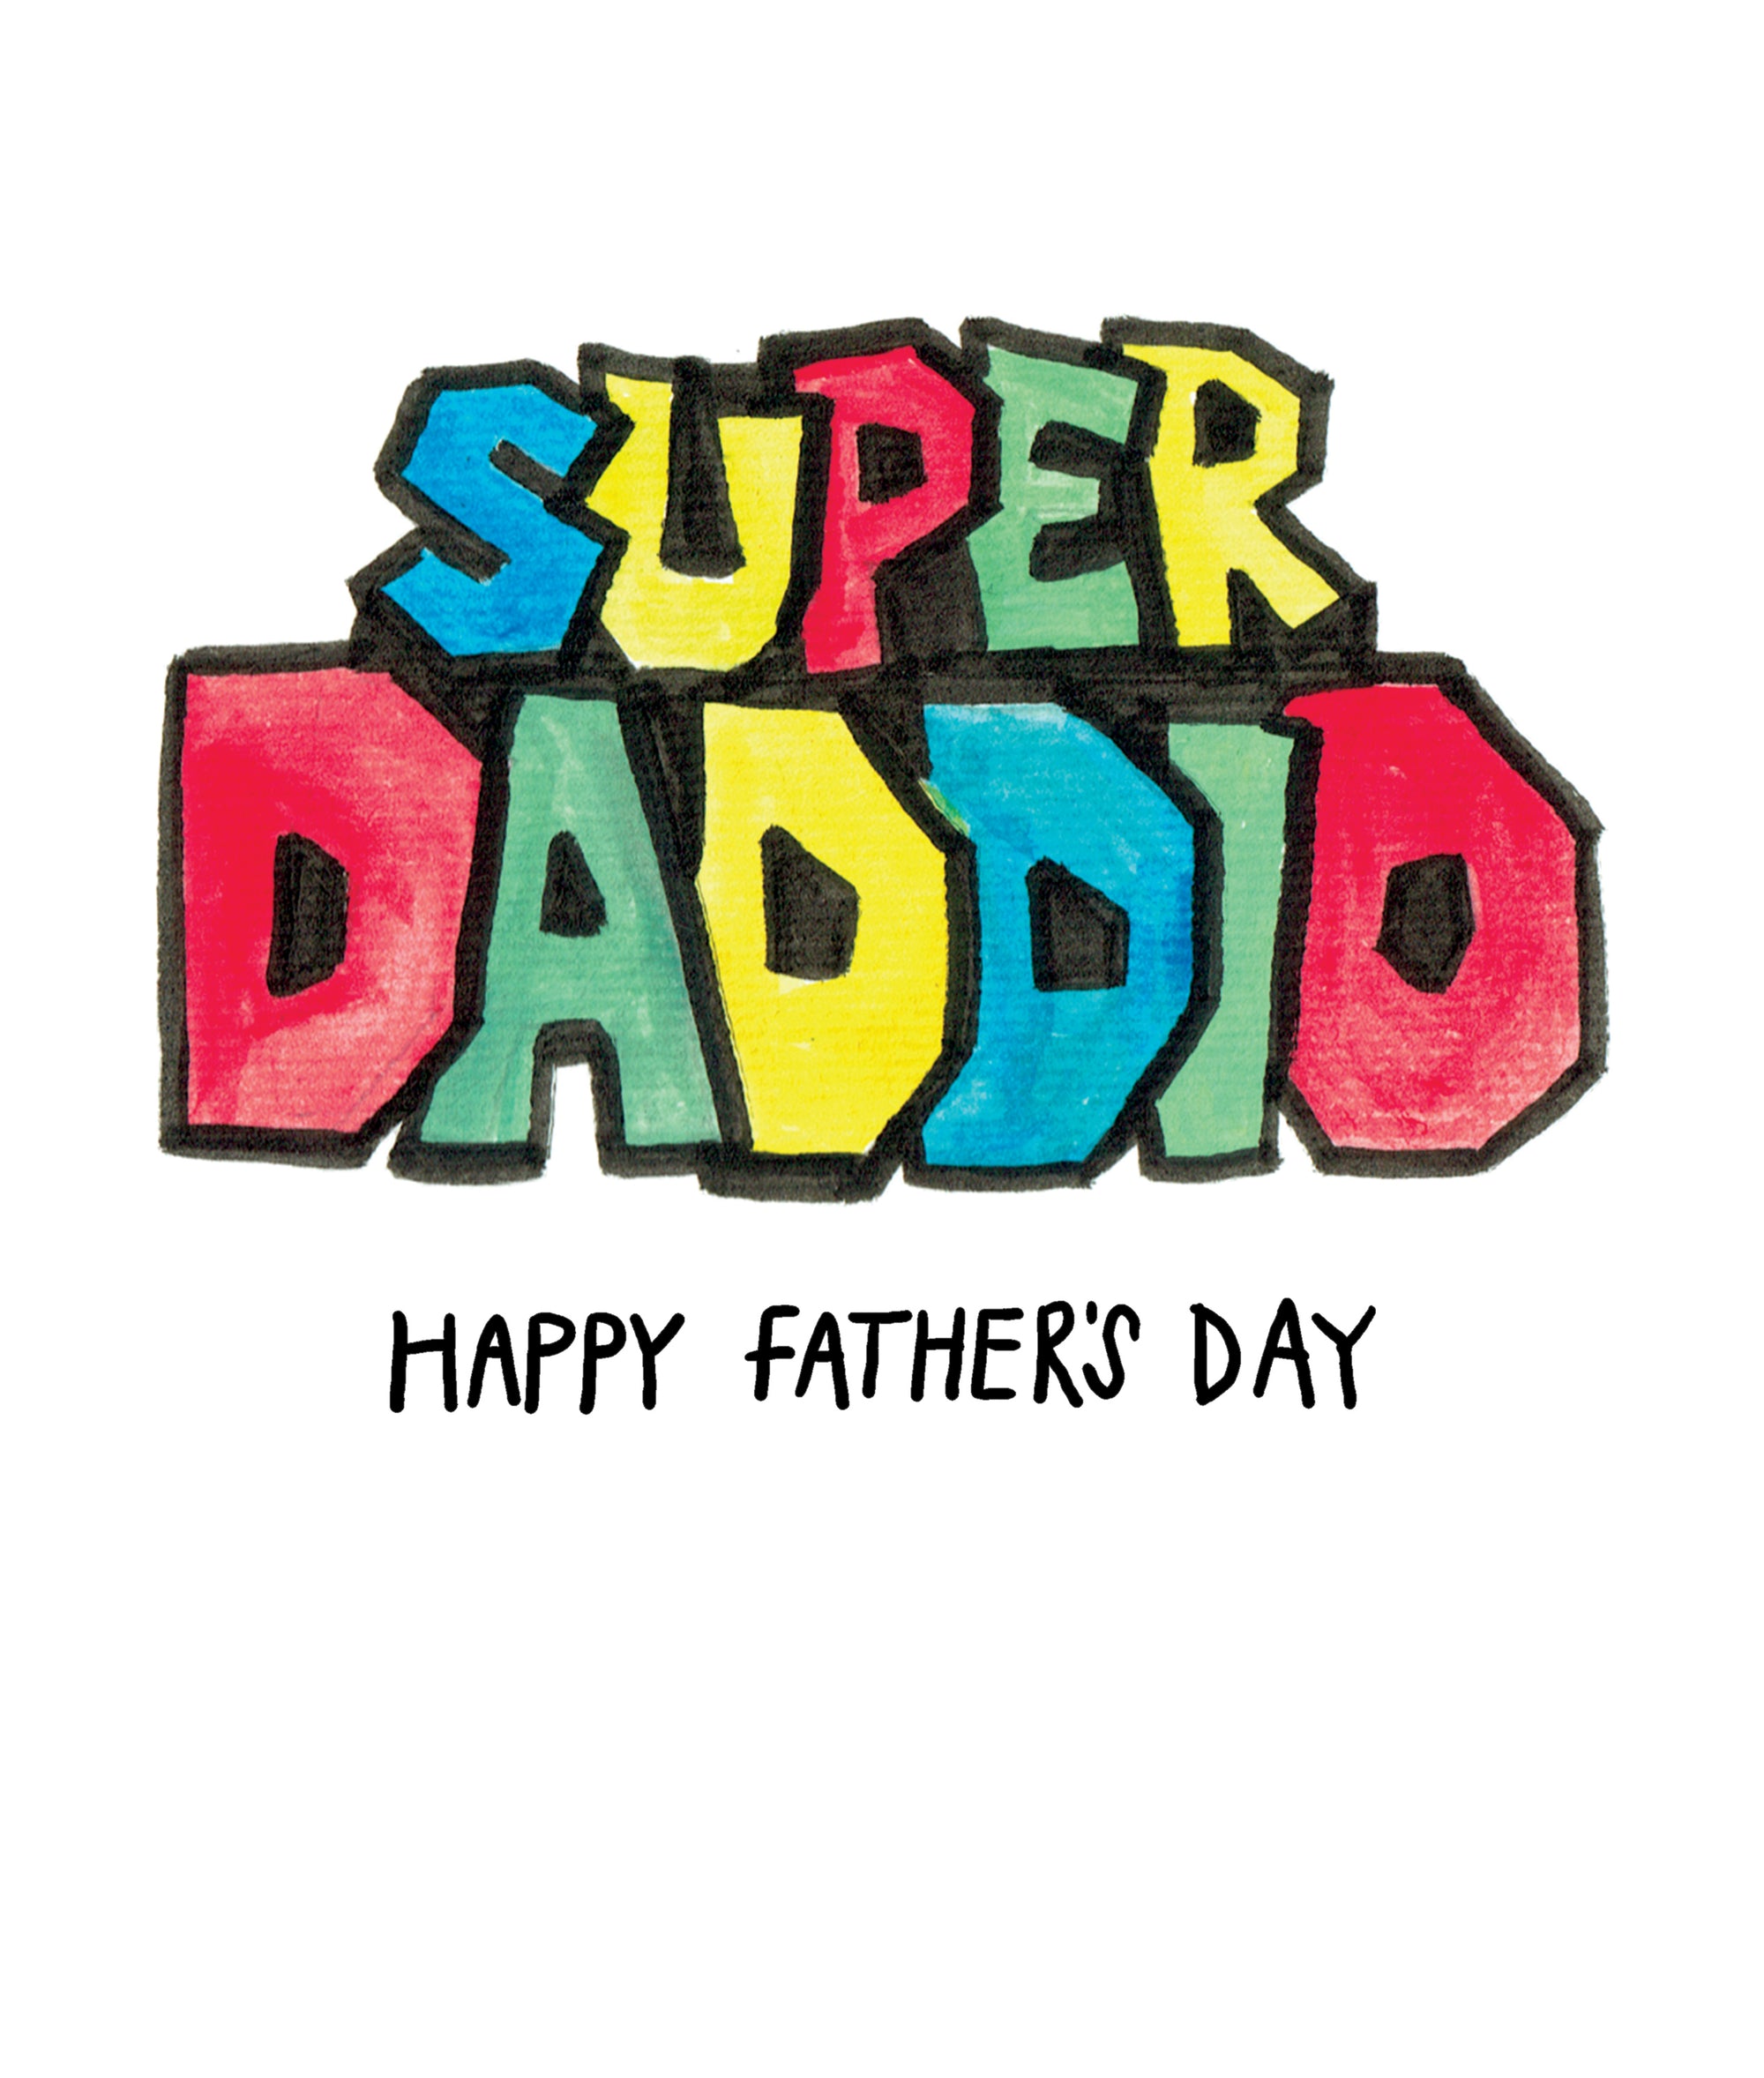 Super Daddio Funny Father's Day Card by penny black